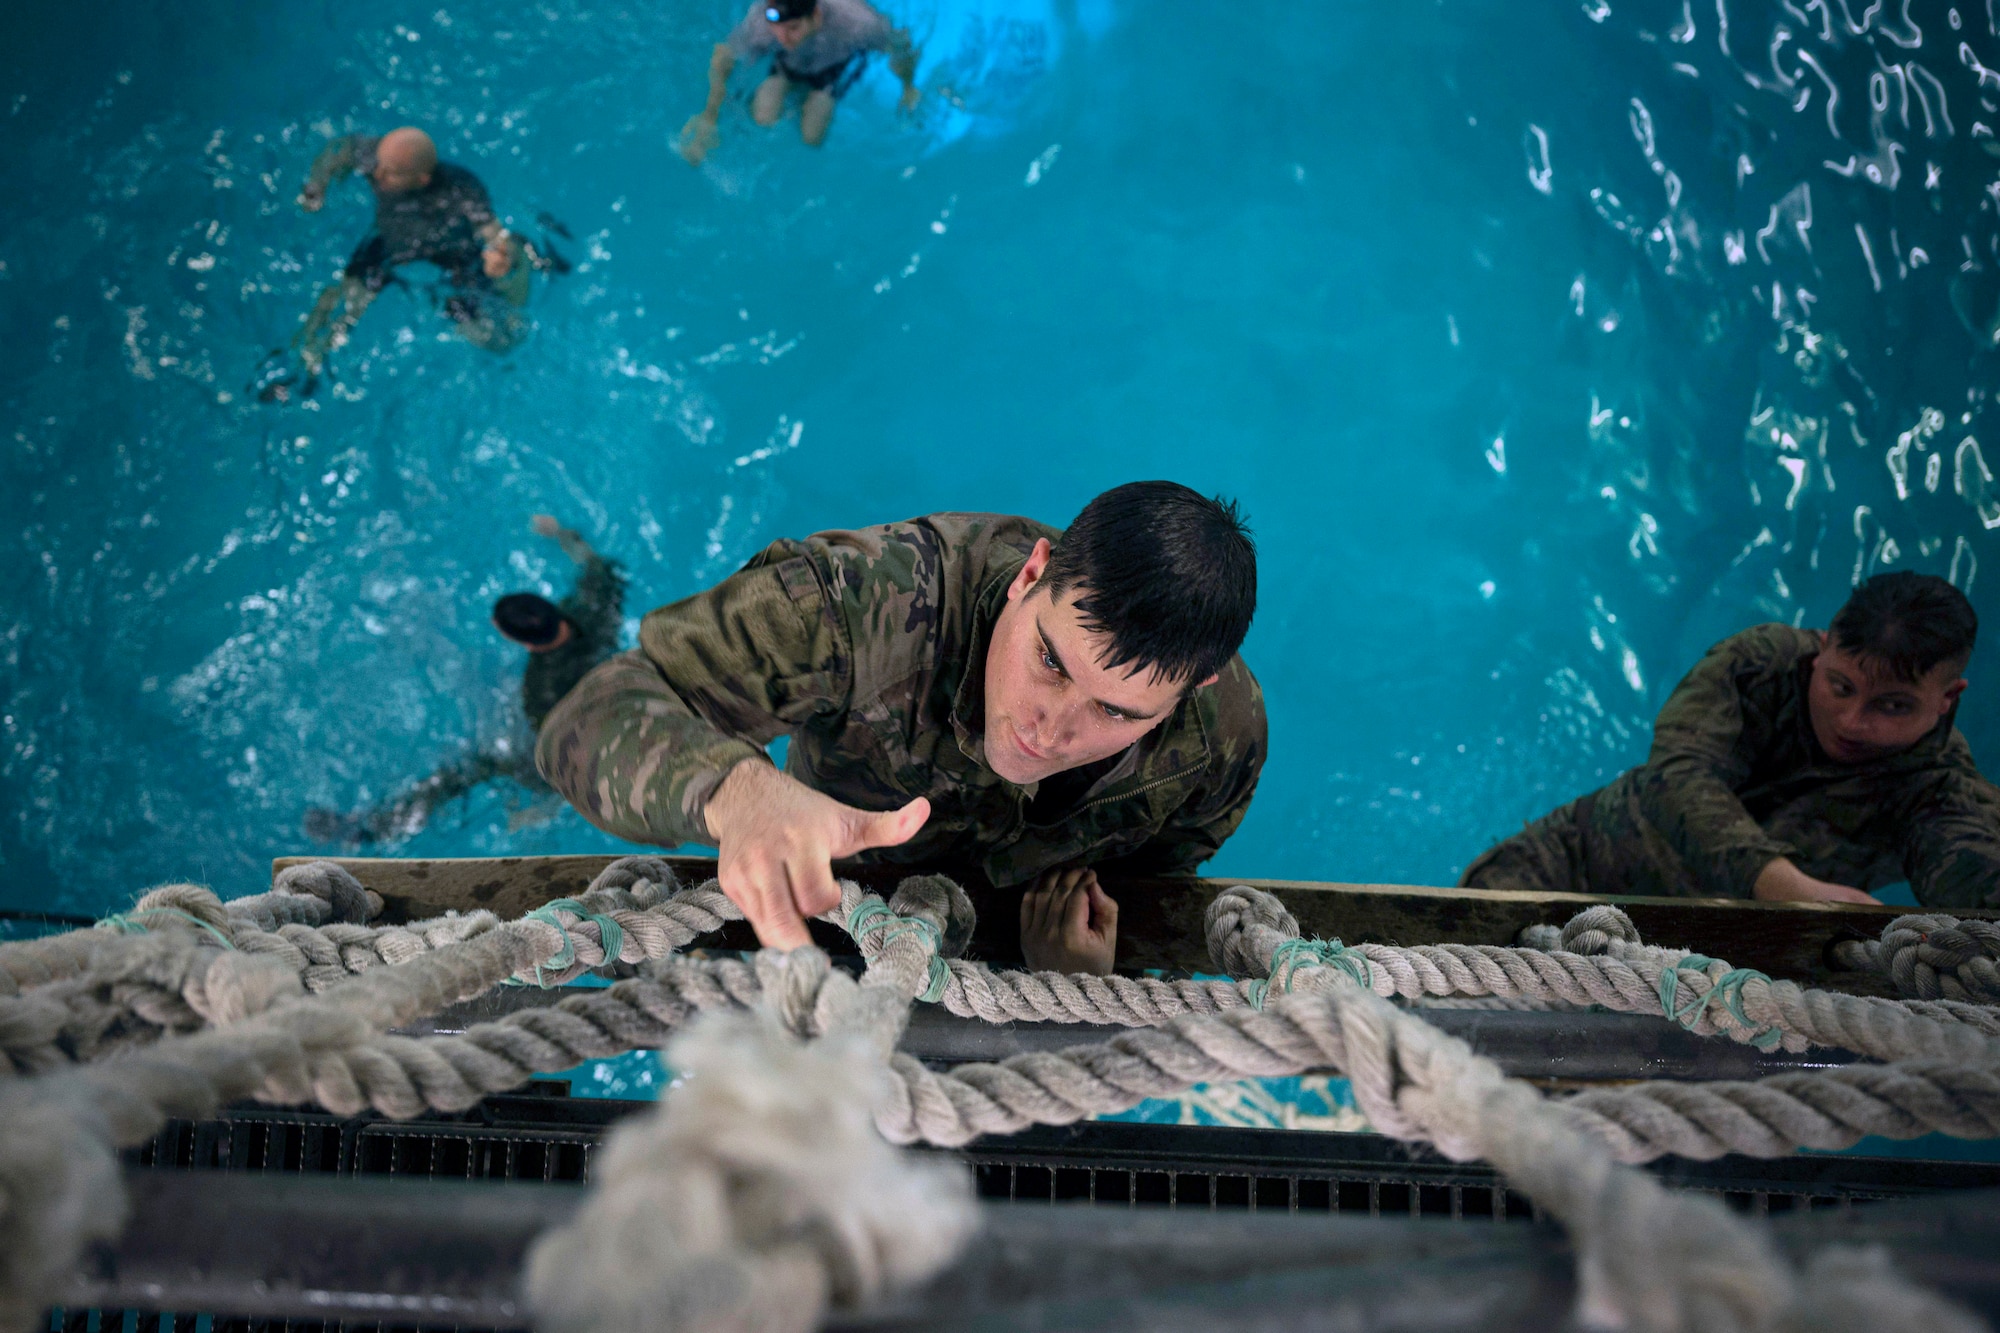 Tech. Sgt. Tyler Cameron climbs a rope ladder over a pool